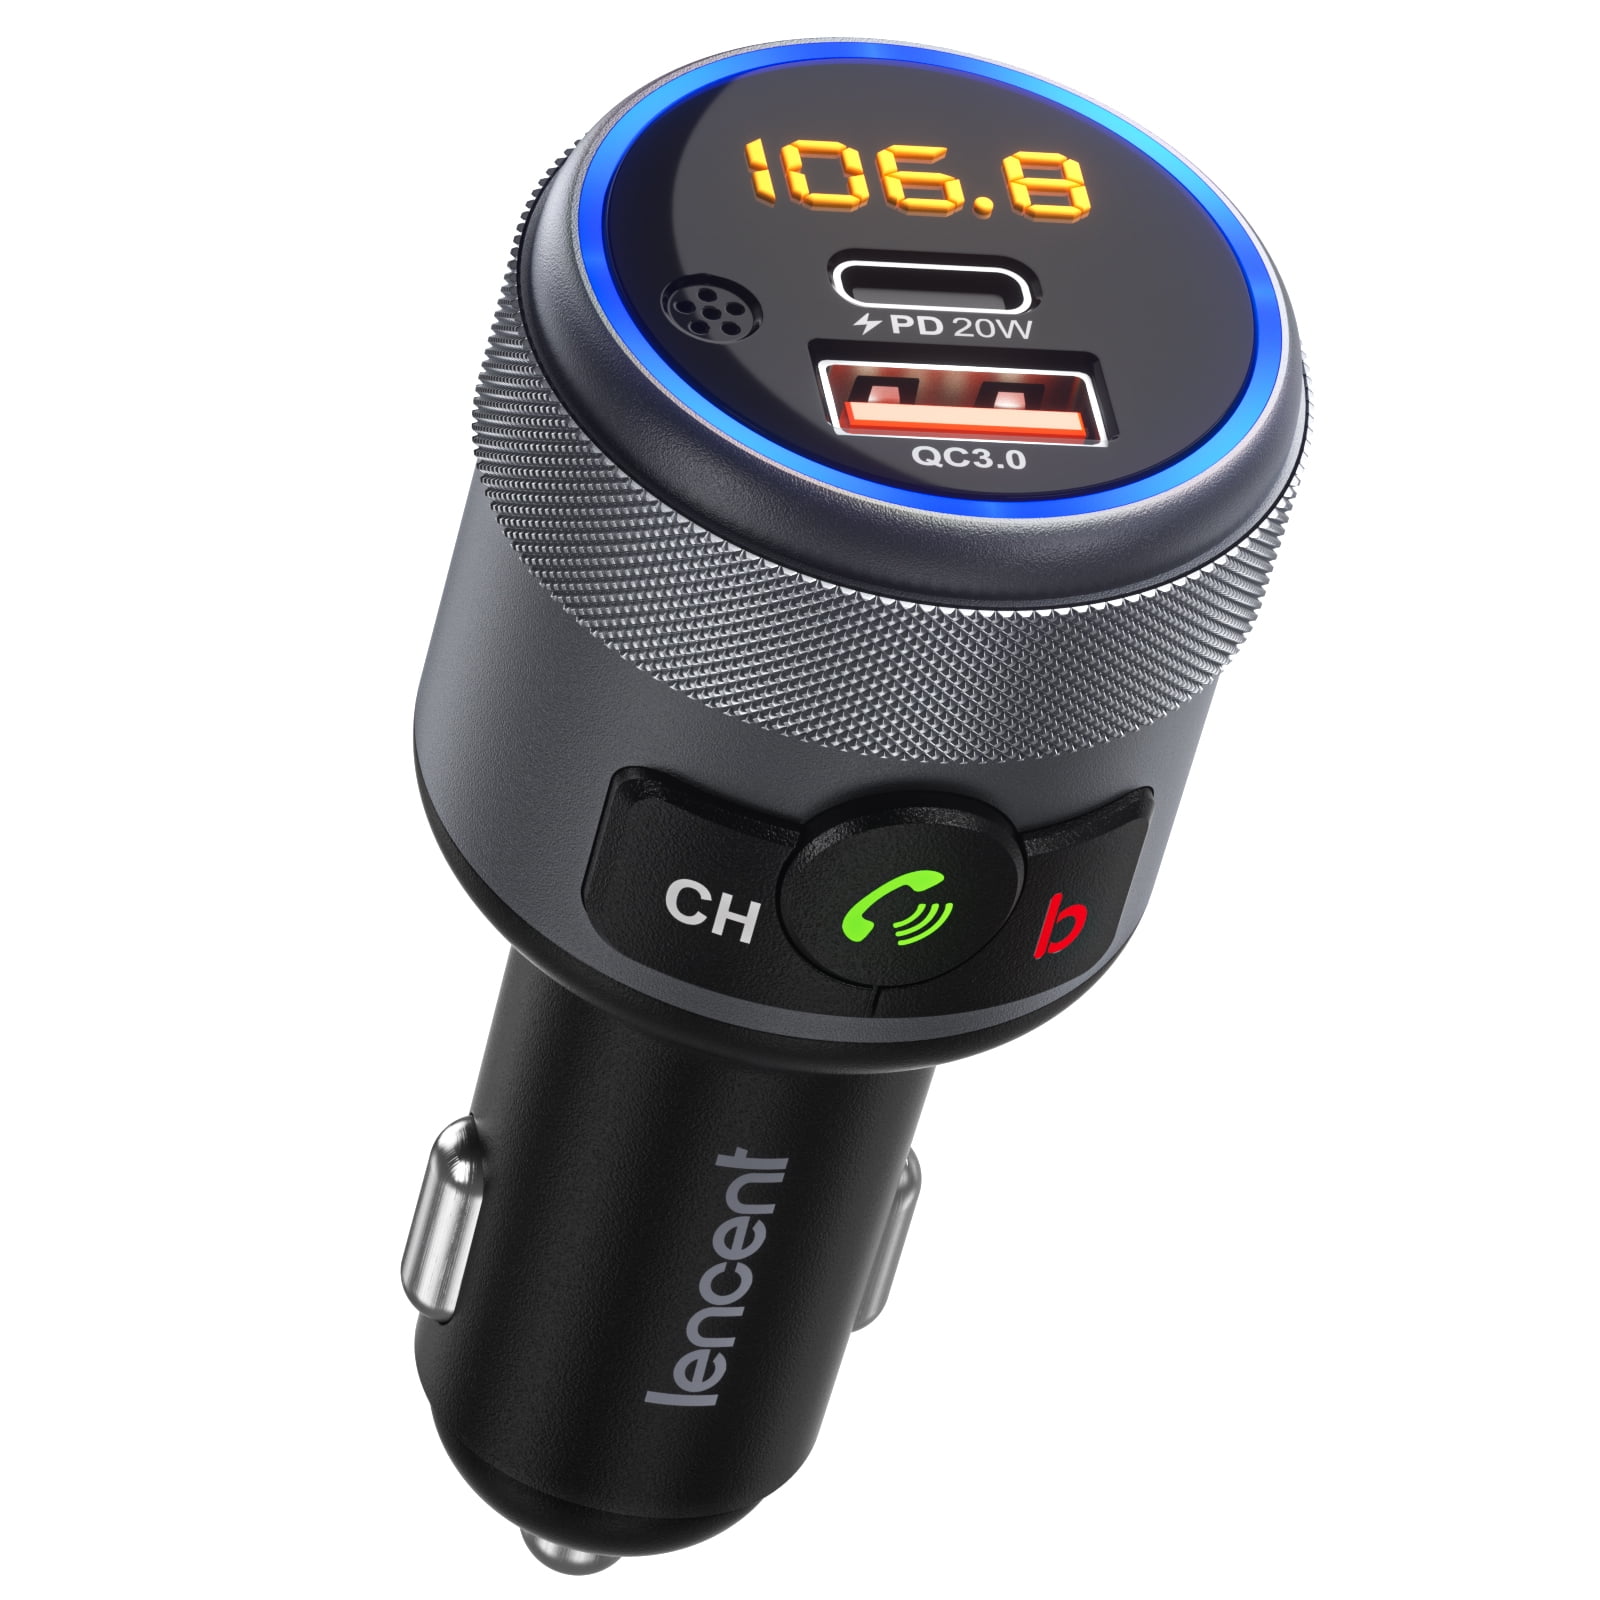  LENCENT FM Transmitter in-Car Adapter,Type-C PD 20W+ QC3.0 Fast  USB Charger, Wireless Bluetooth 5.0 Radio Car Kit,Hands Free Calling, Mp3  Player Receiver Hi Fi Bass Support U Disk : Electronics